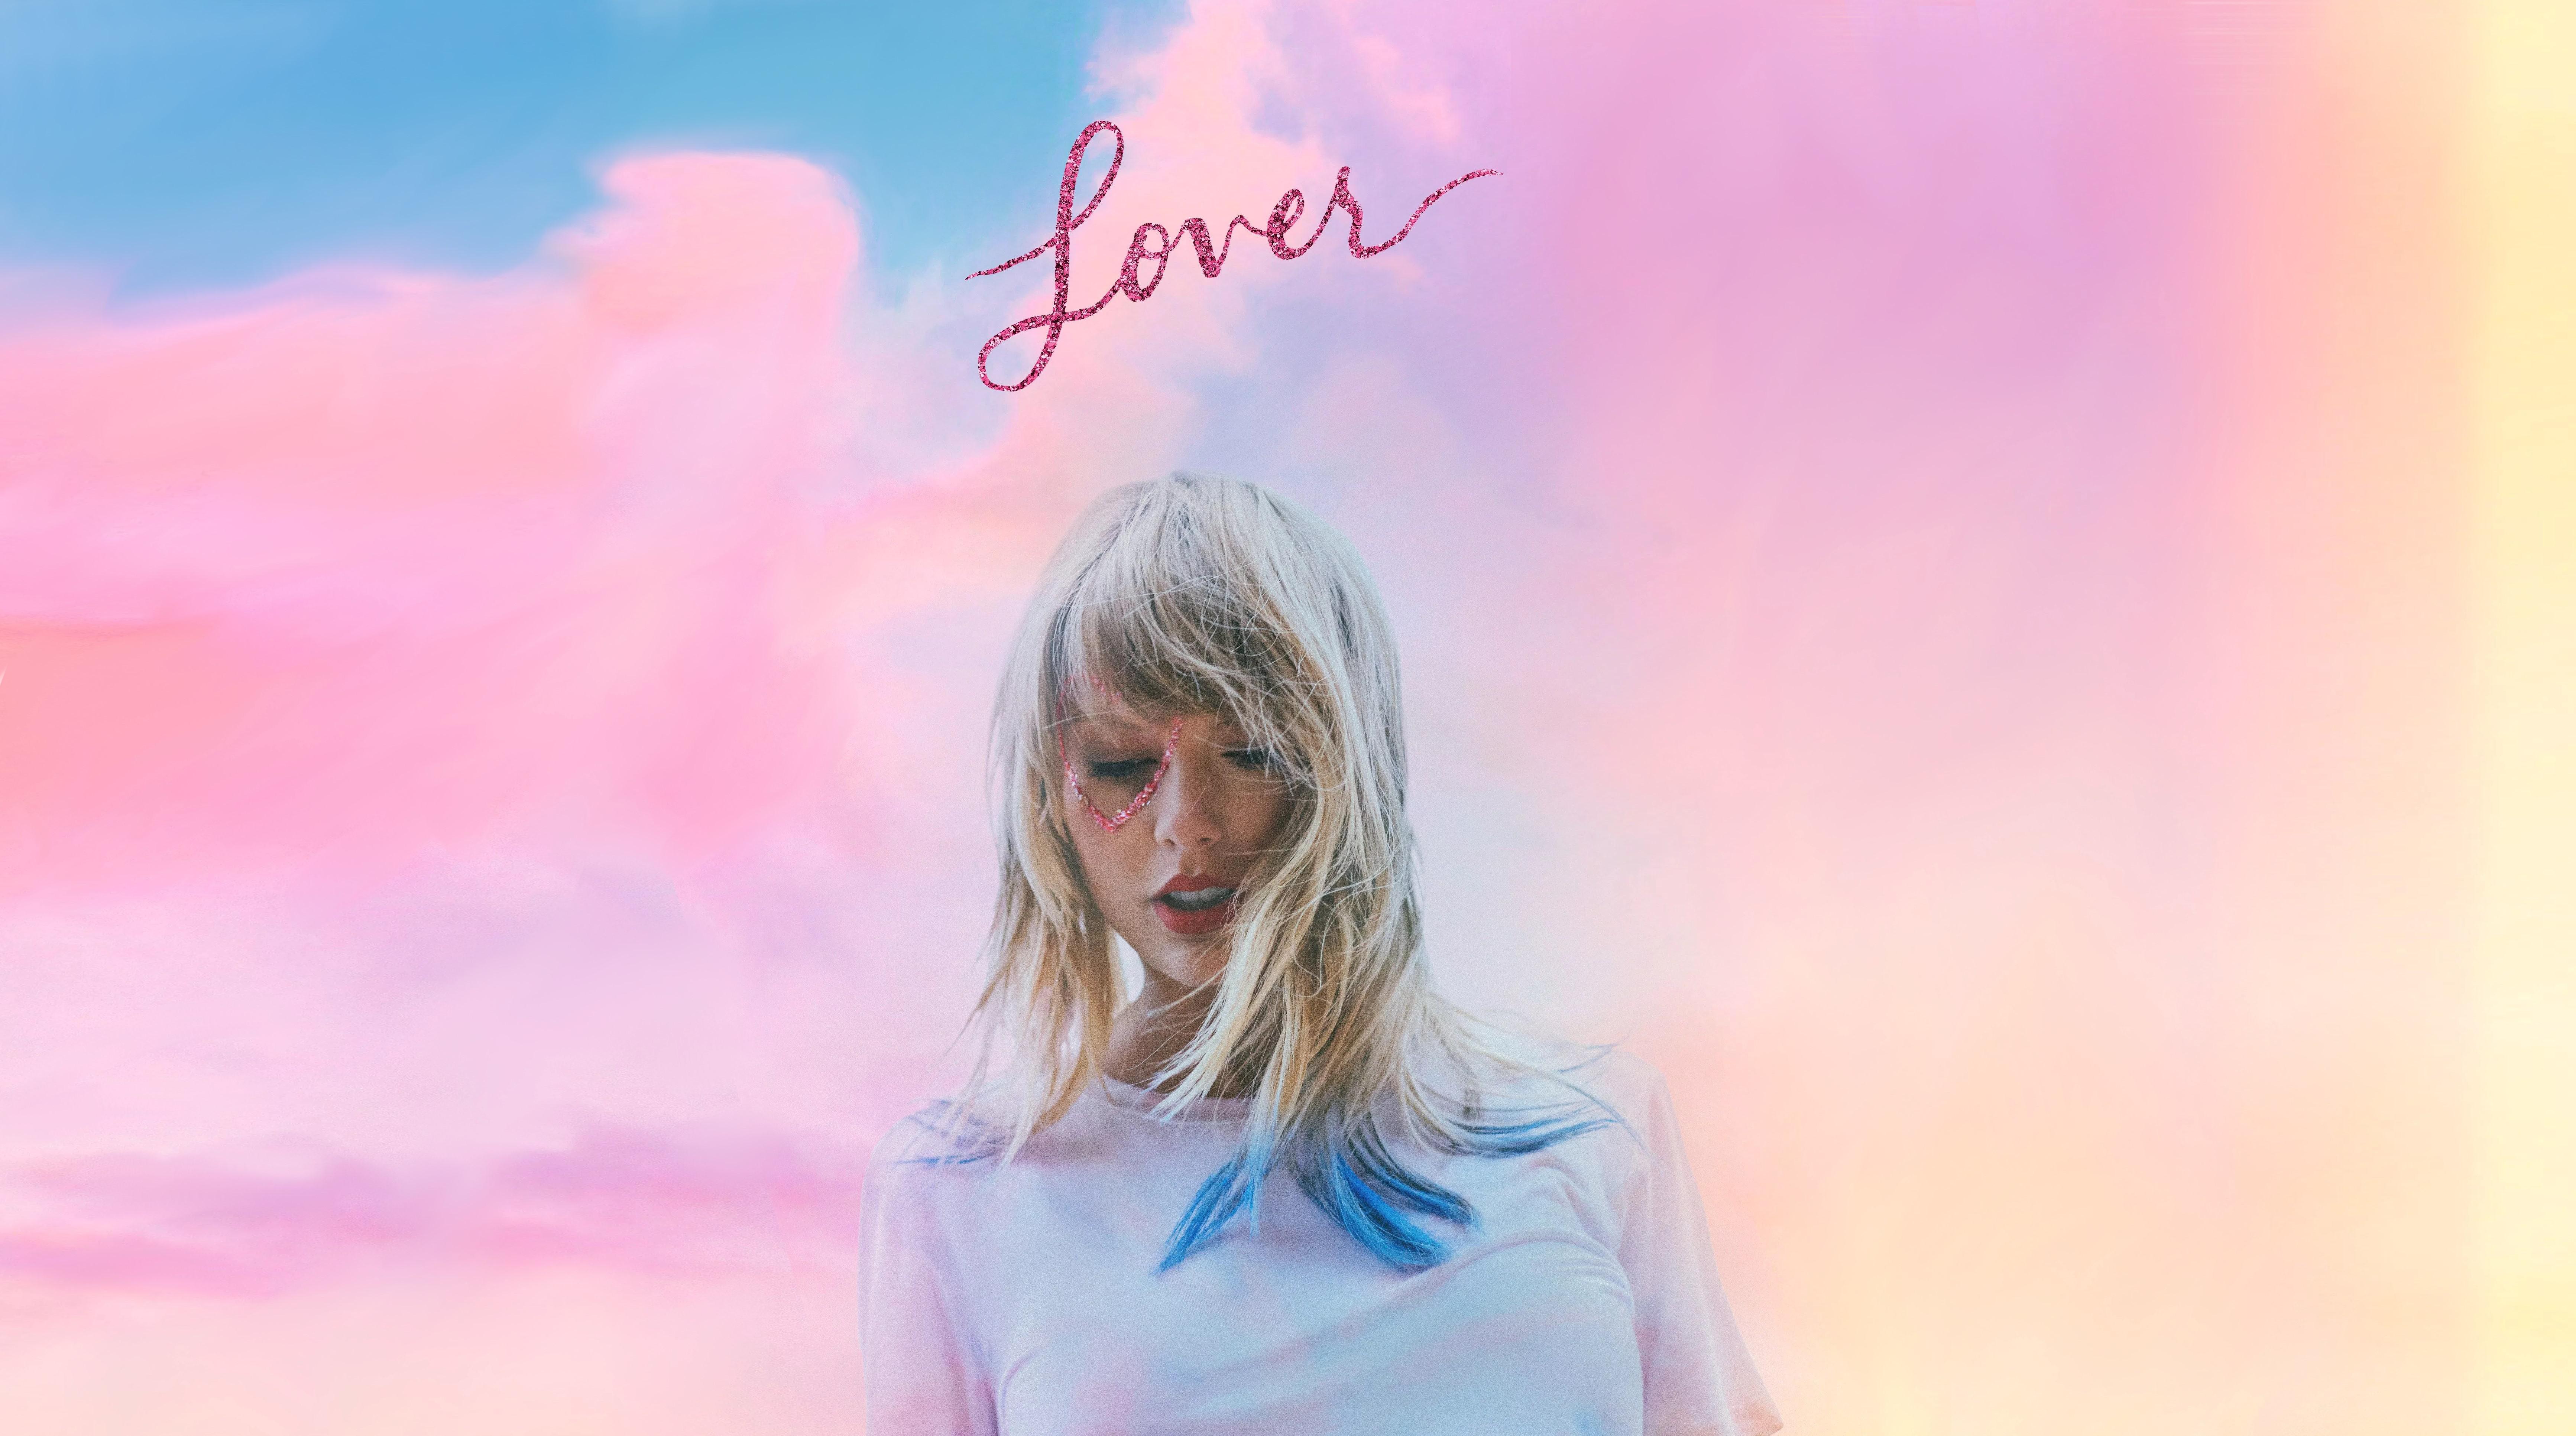 Ive created a high resolution desktop wallpaper of the lover